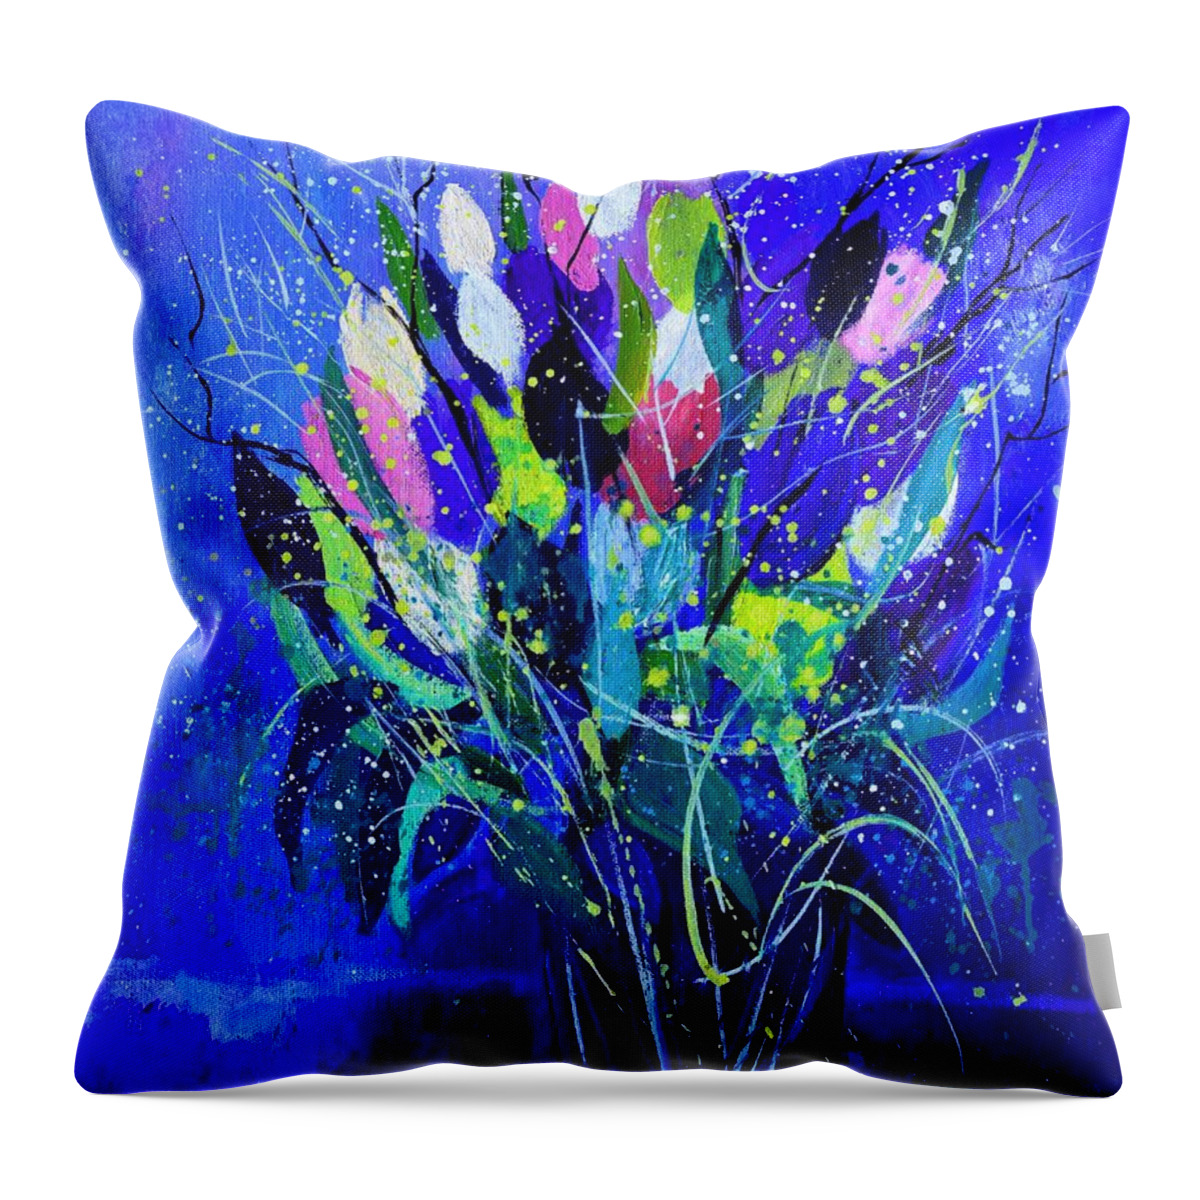 Flowers Throw Pillow featuring the painting Tulips by Pol Ledent